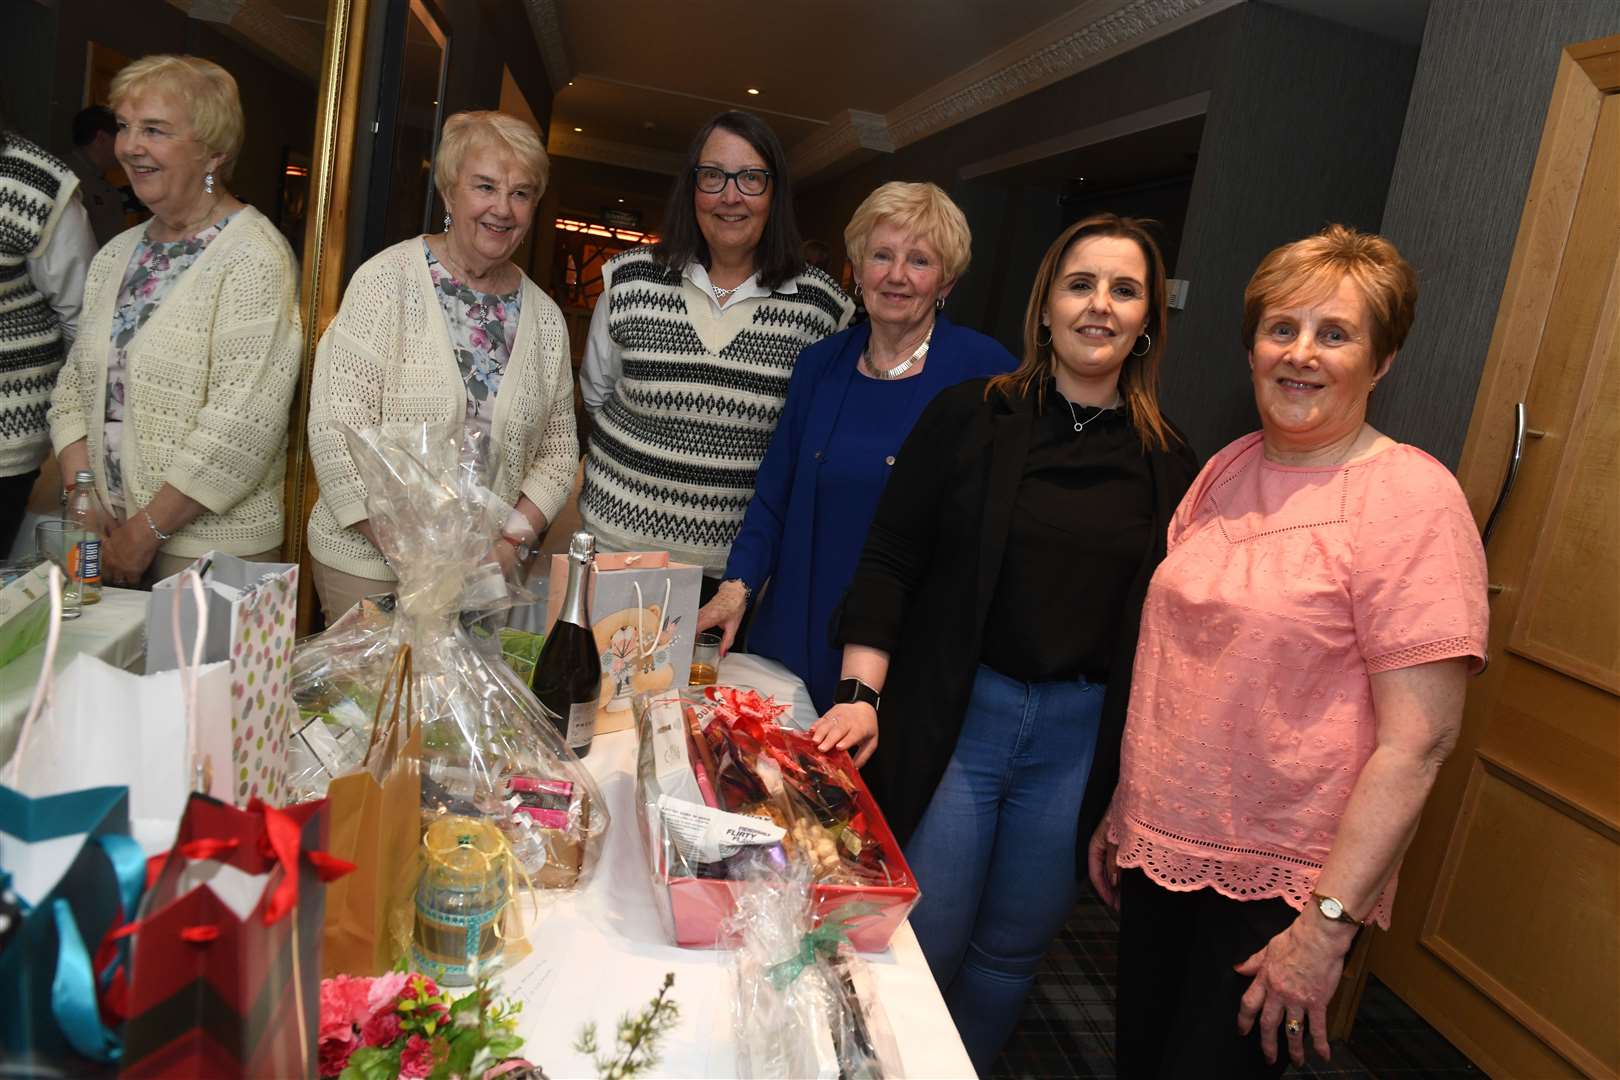 The Cancer Research UK team with raffle prizes (from left) Iris Campbell, Liz Gardener, Edith McKnight, Laura Patience and Anne MacIver. Picture: Alexander Williamson.